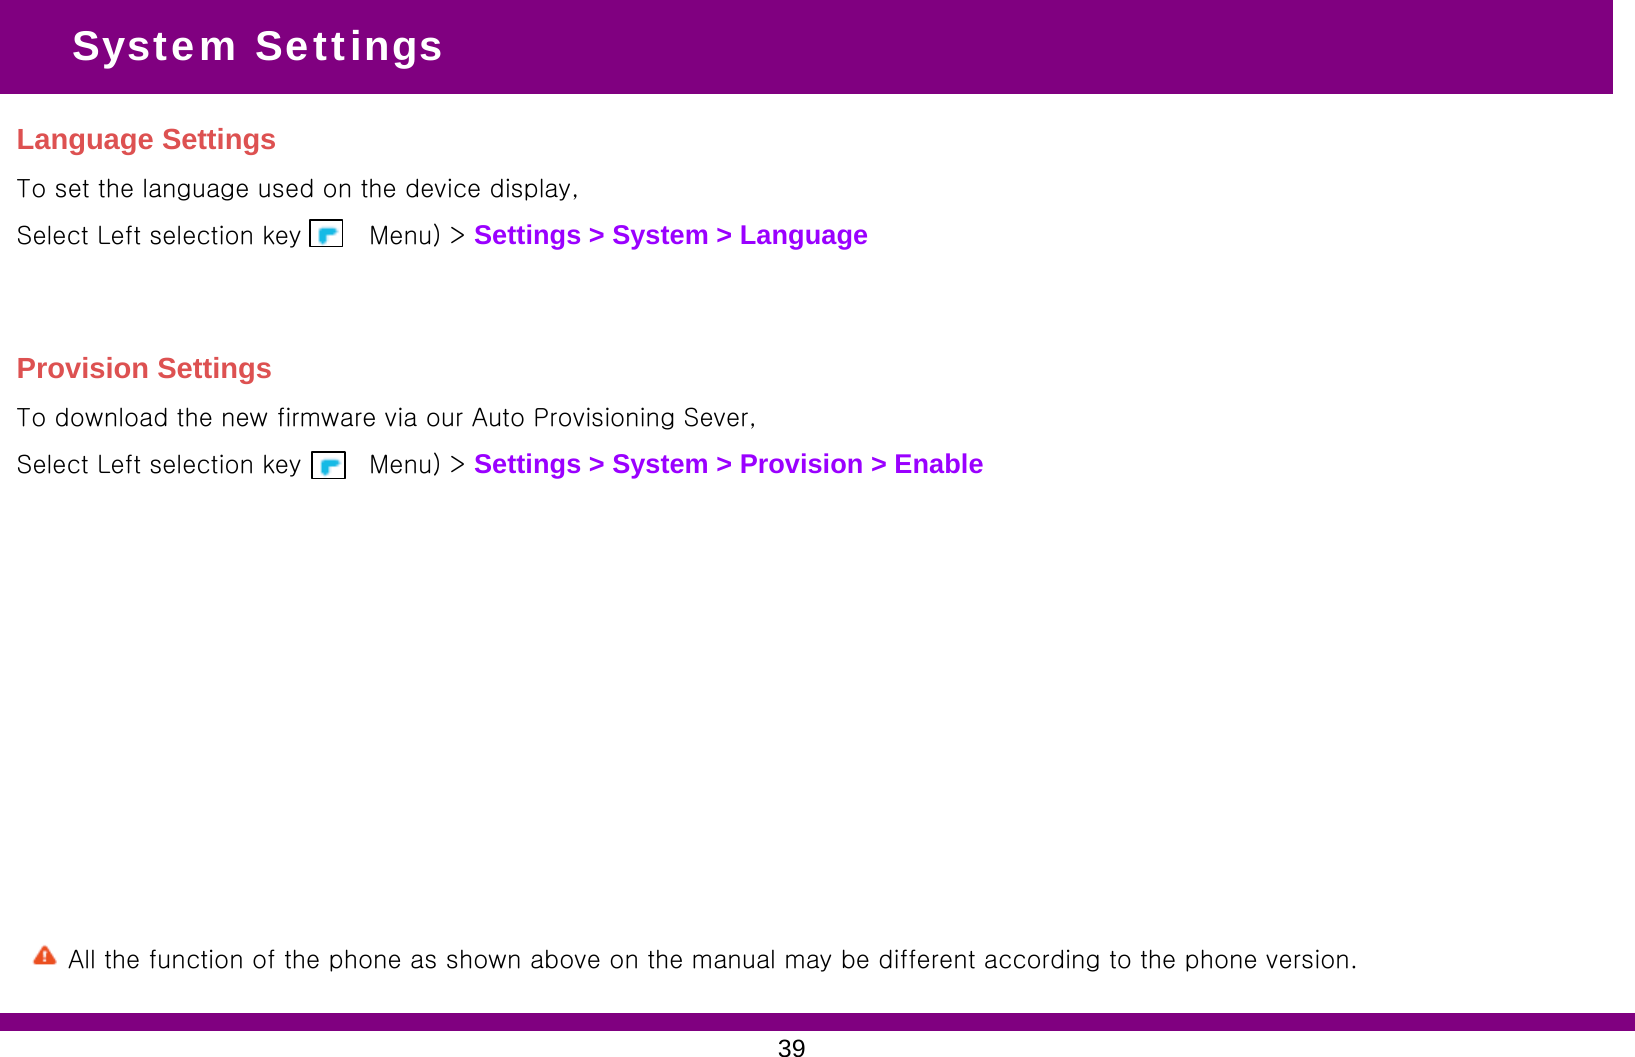 Language SettingsTo set the language used on the device display, Select Left selection key (      Menu) &gt; Settings &gt; System &gt; Language System SettingsProvision SettingsTo download the new firmware via our Auto Provisioning Sever, Select Left selection key (      Menu) &gt; Settings &gt; System &gt; Provision &gt; Enable39All the function of the phone as shown above on the manual may be different according to the phone version.